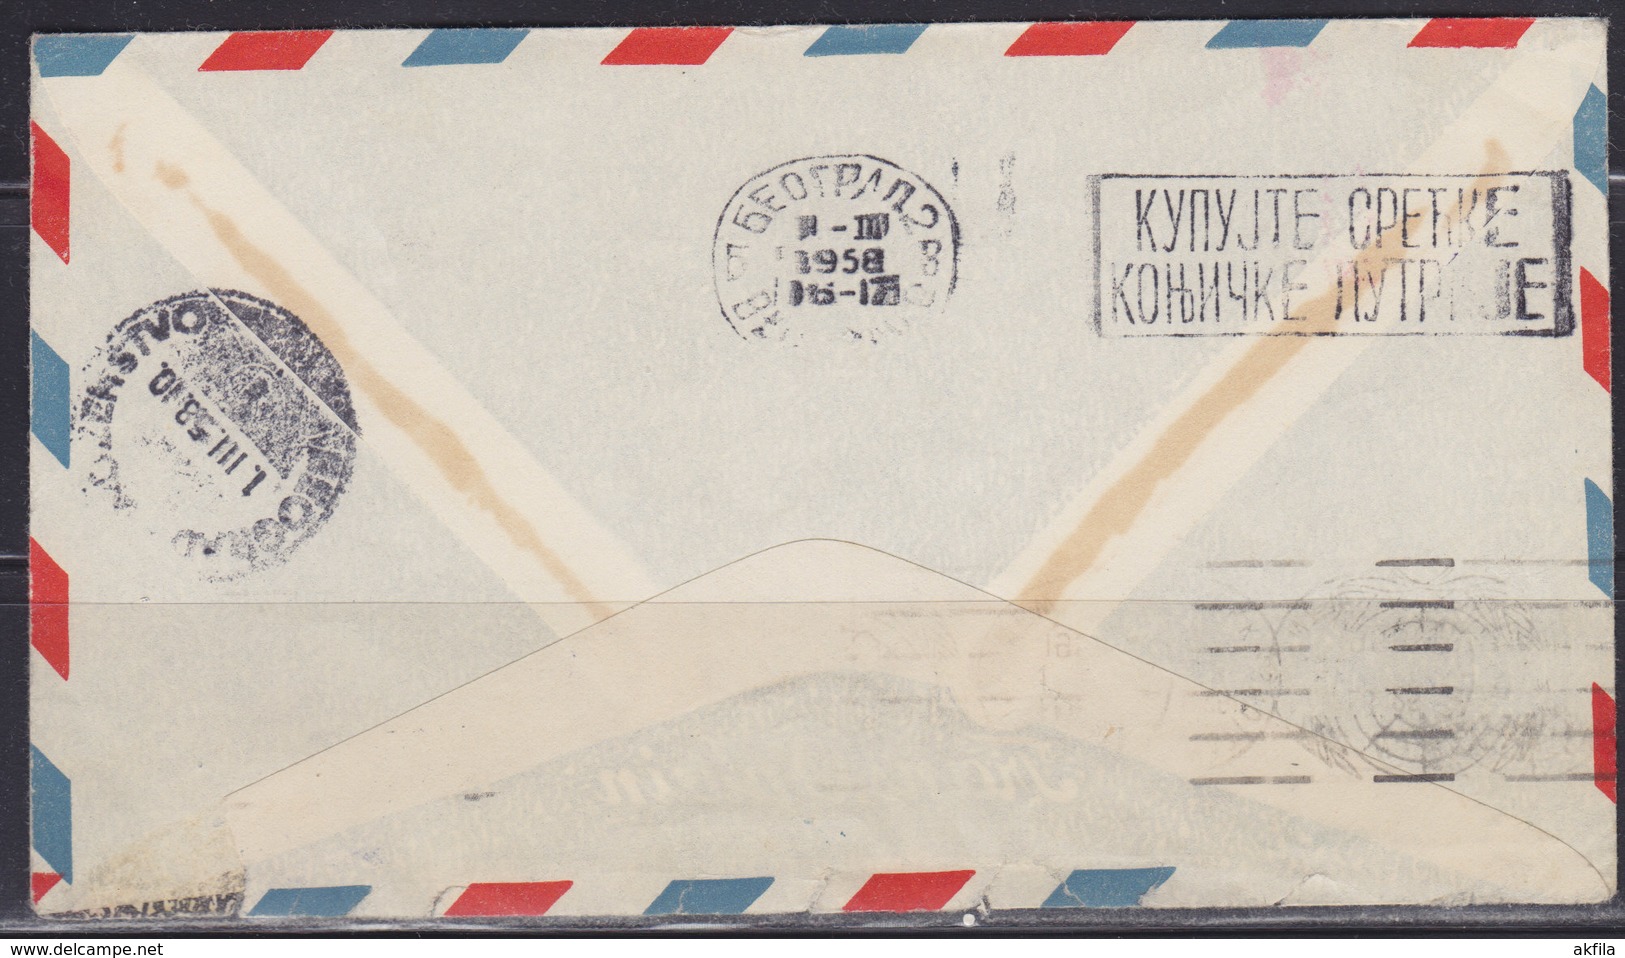 United Nations (New York) 25.II.1958 Airmail Letter Sent To Beograd (YU) - Luftpost